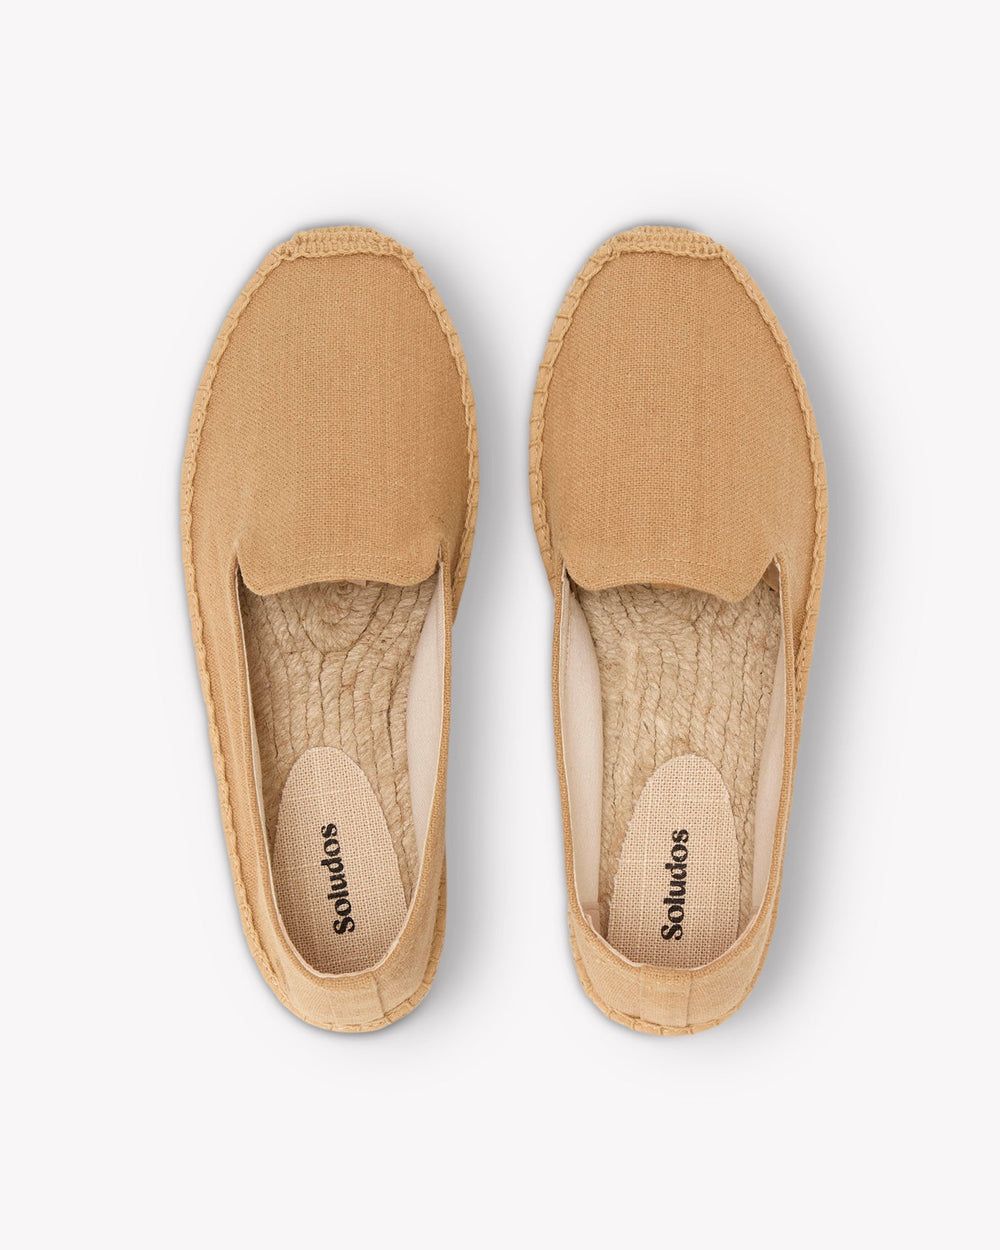 The Smoking Slipper - Core - Cafe Taupe - Women's